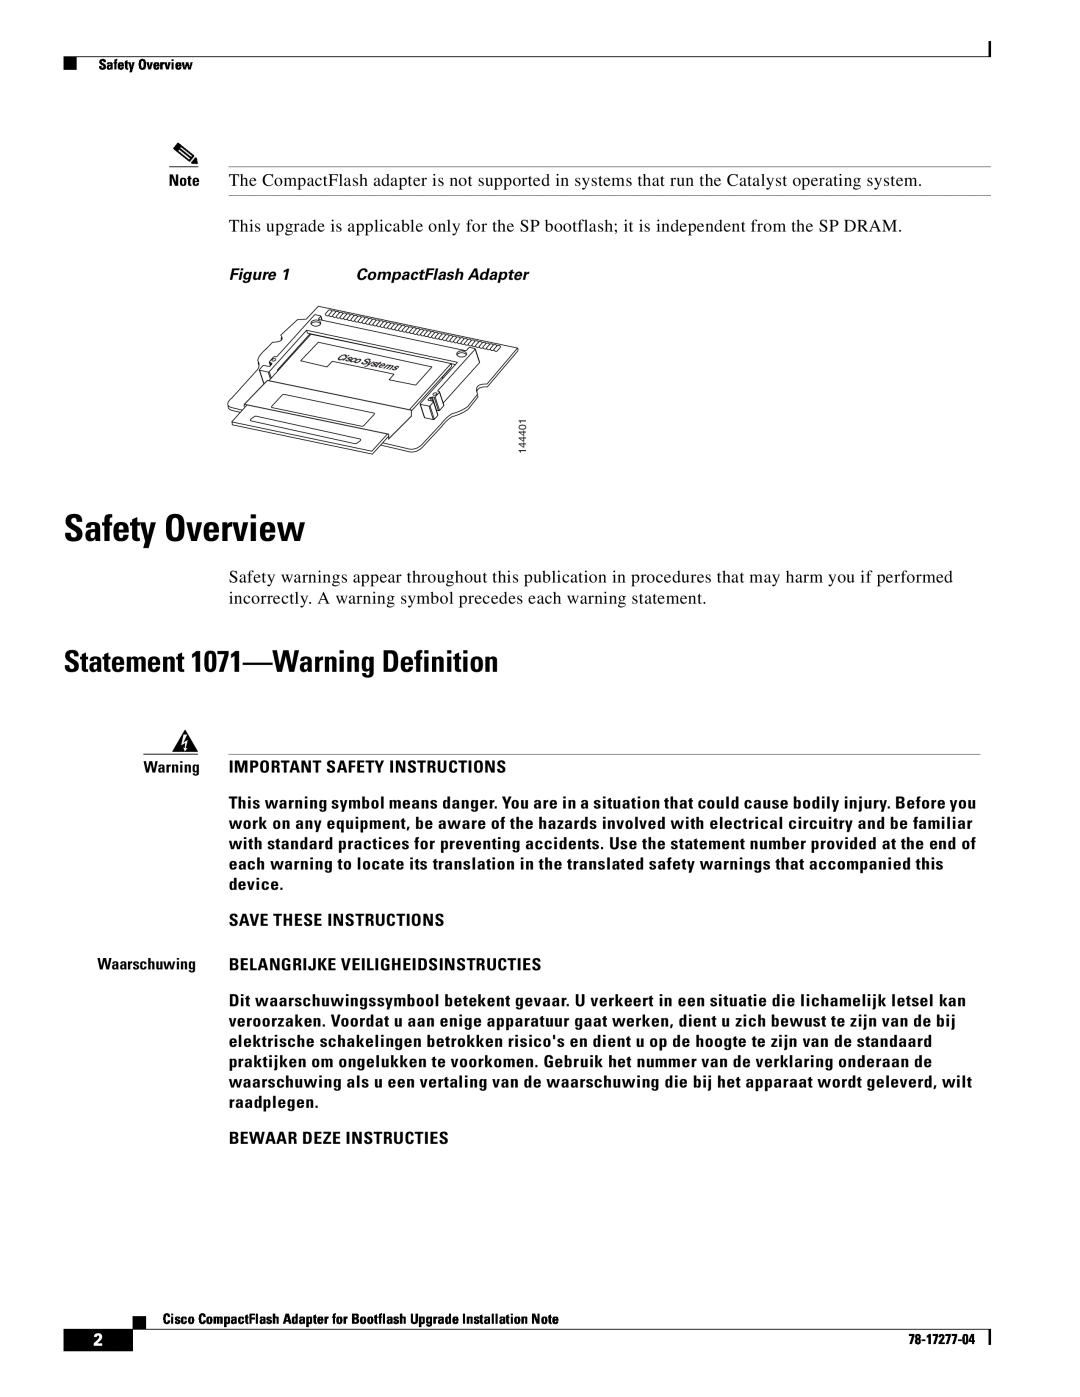 Cisco Systems CompactFlash Adapter manual Safety Overview, Statement 1071-Warning Definition 